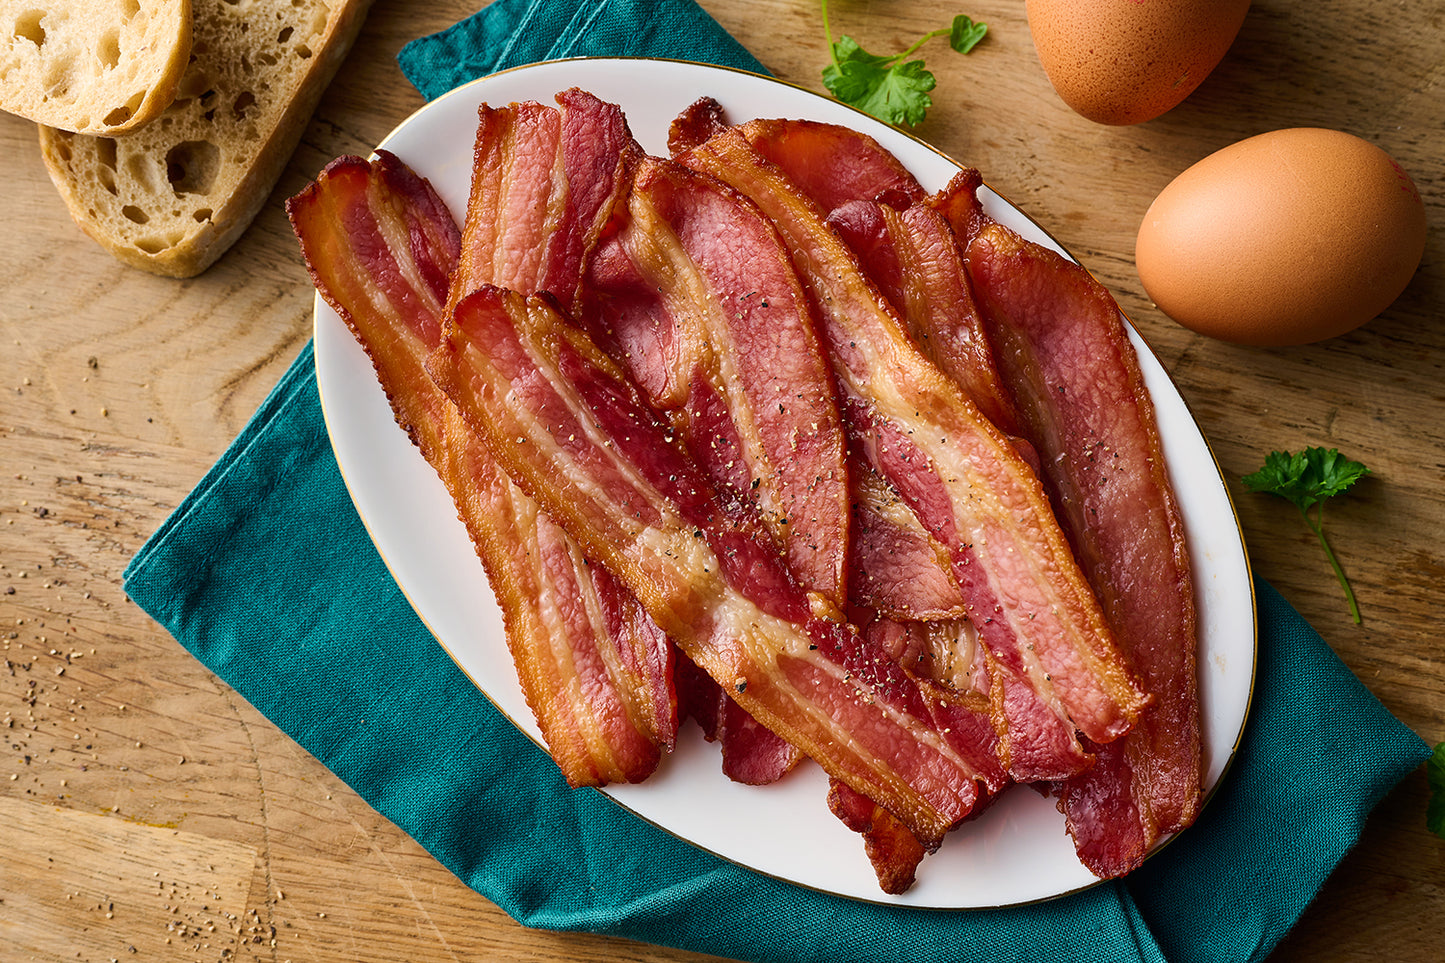 Unsmoked Dry Cured Streaky Bacon